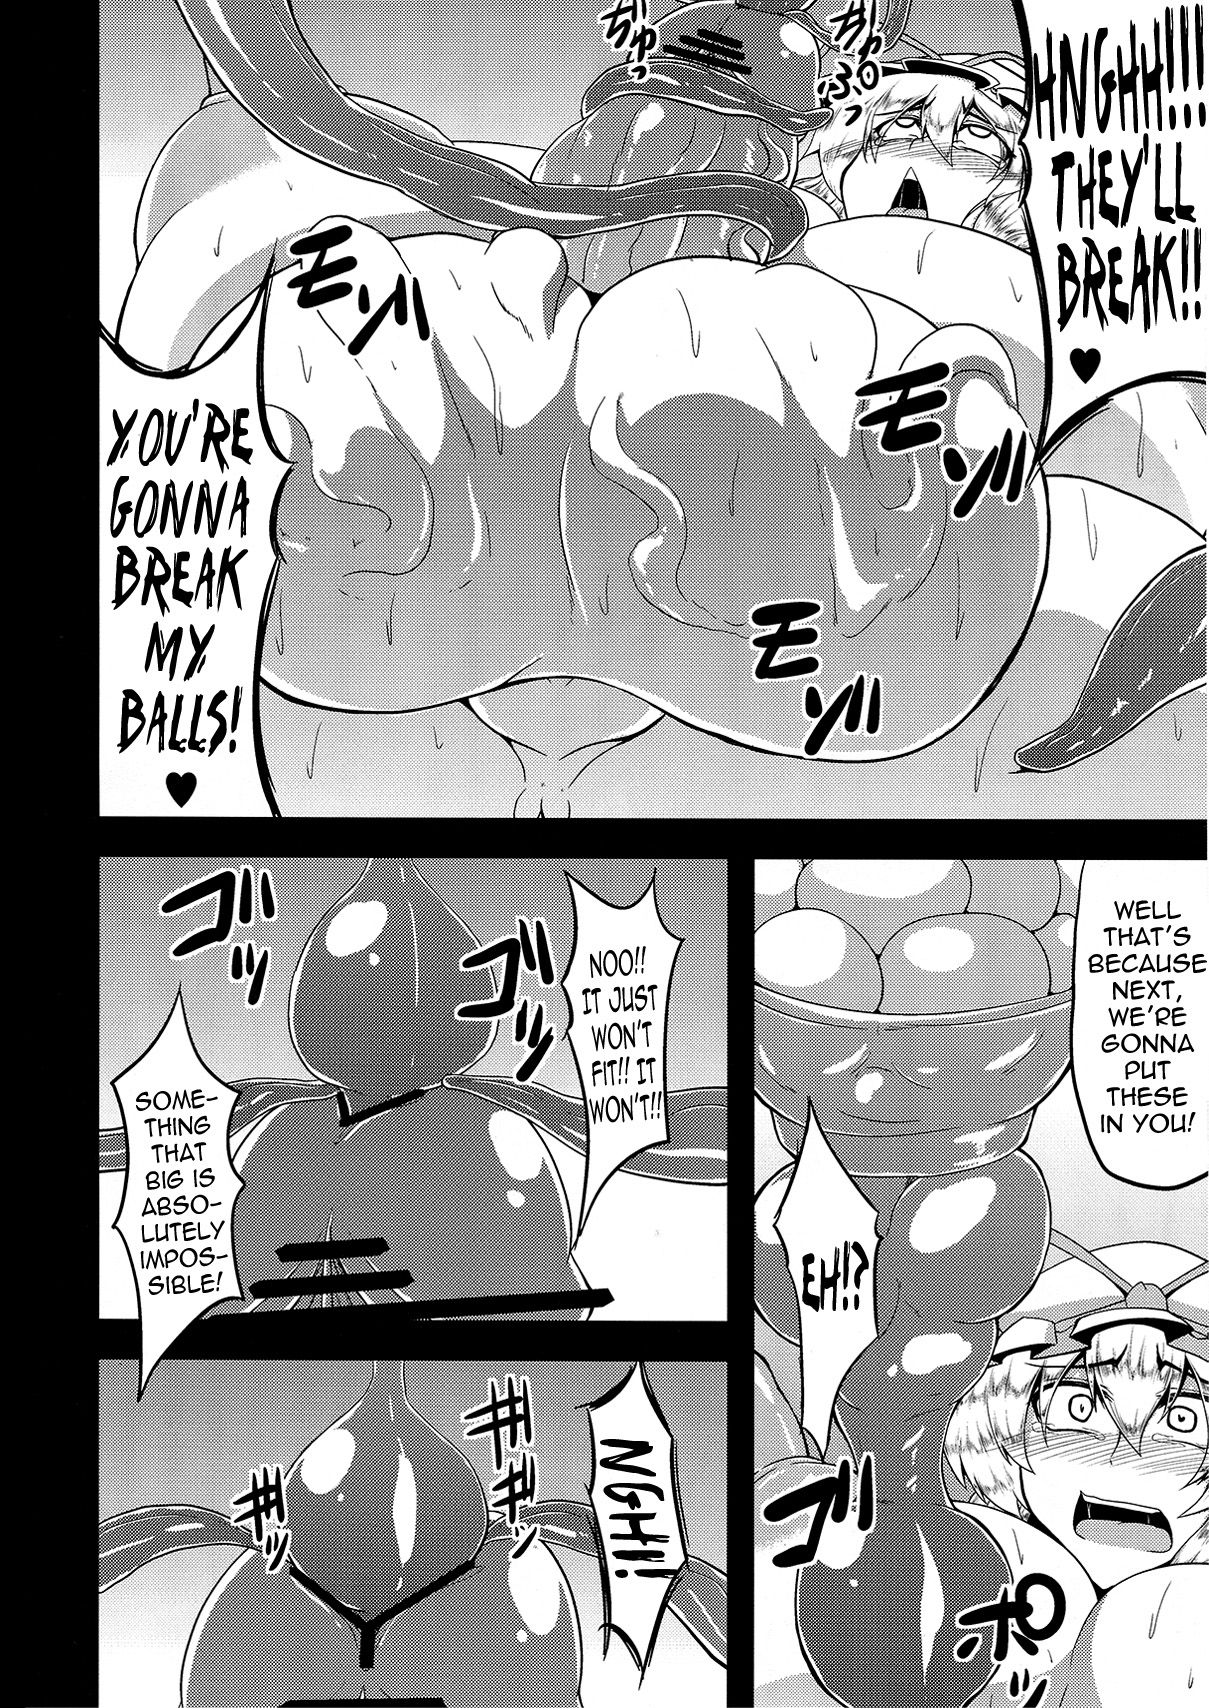 (C82) [Forever and Ever... (Eisen)] Illusionary Cock Story 3 (Touhou Project) [English] (C82) [Forever and ever... (英戦)] 幻想鎮々物語3 (東方Project) [英訳]